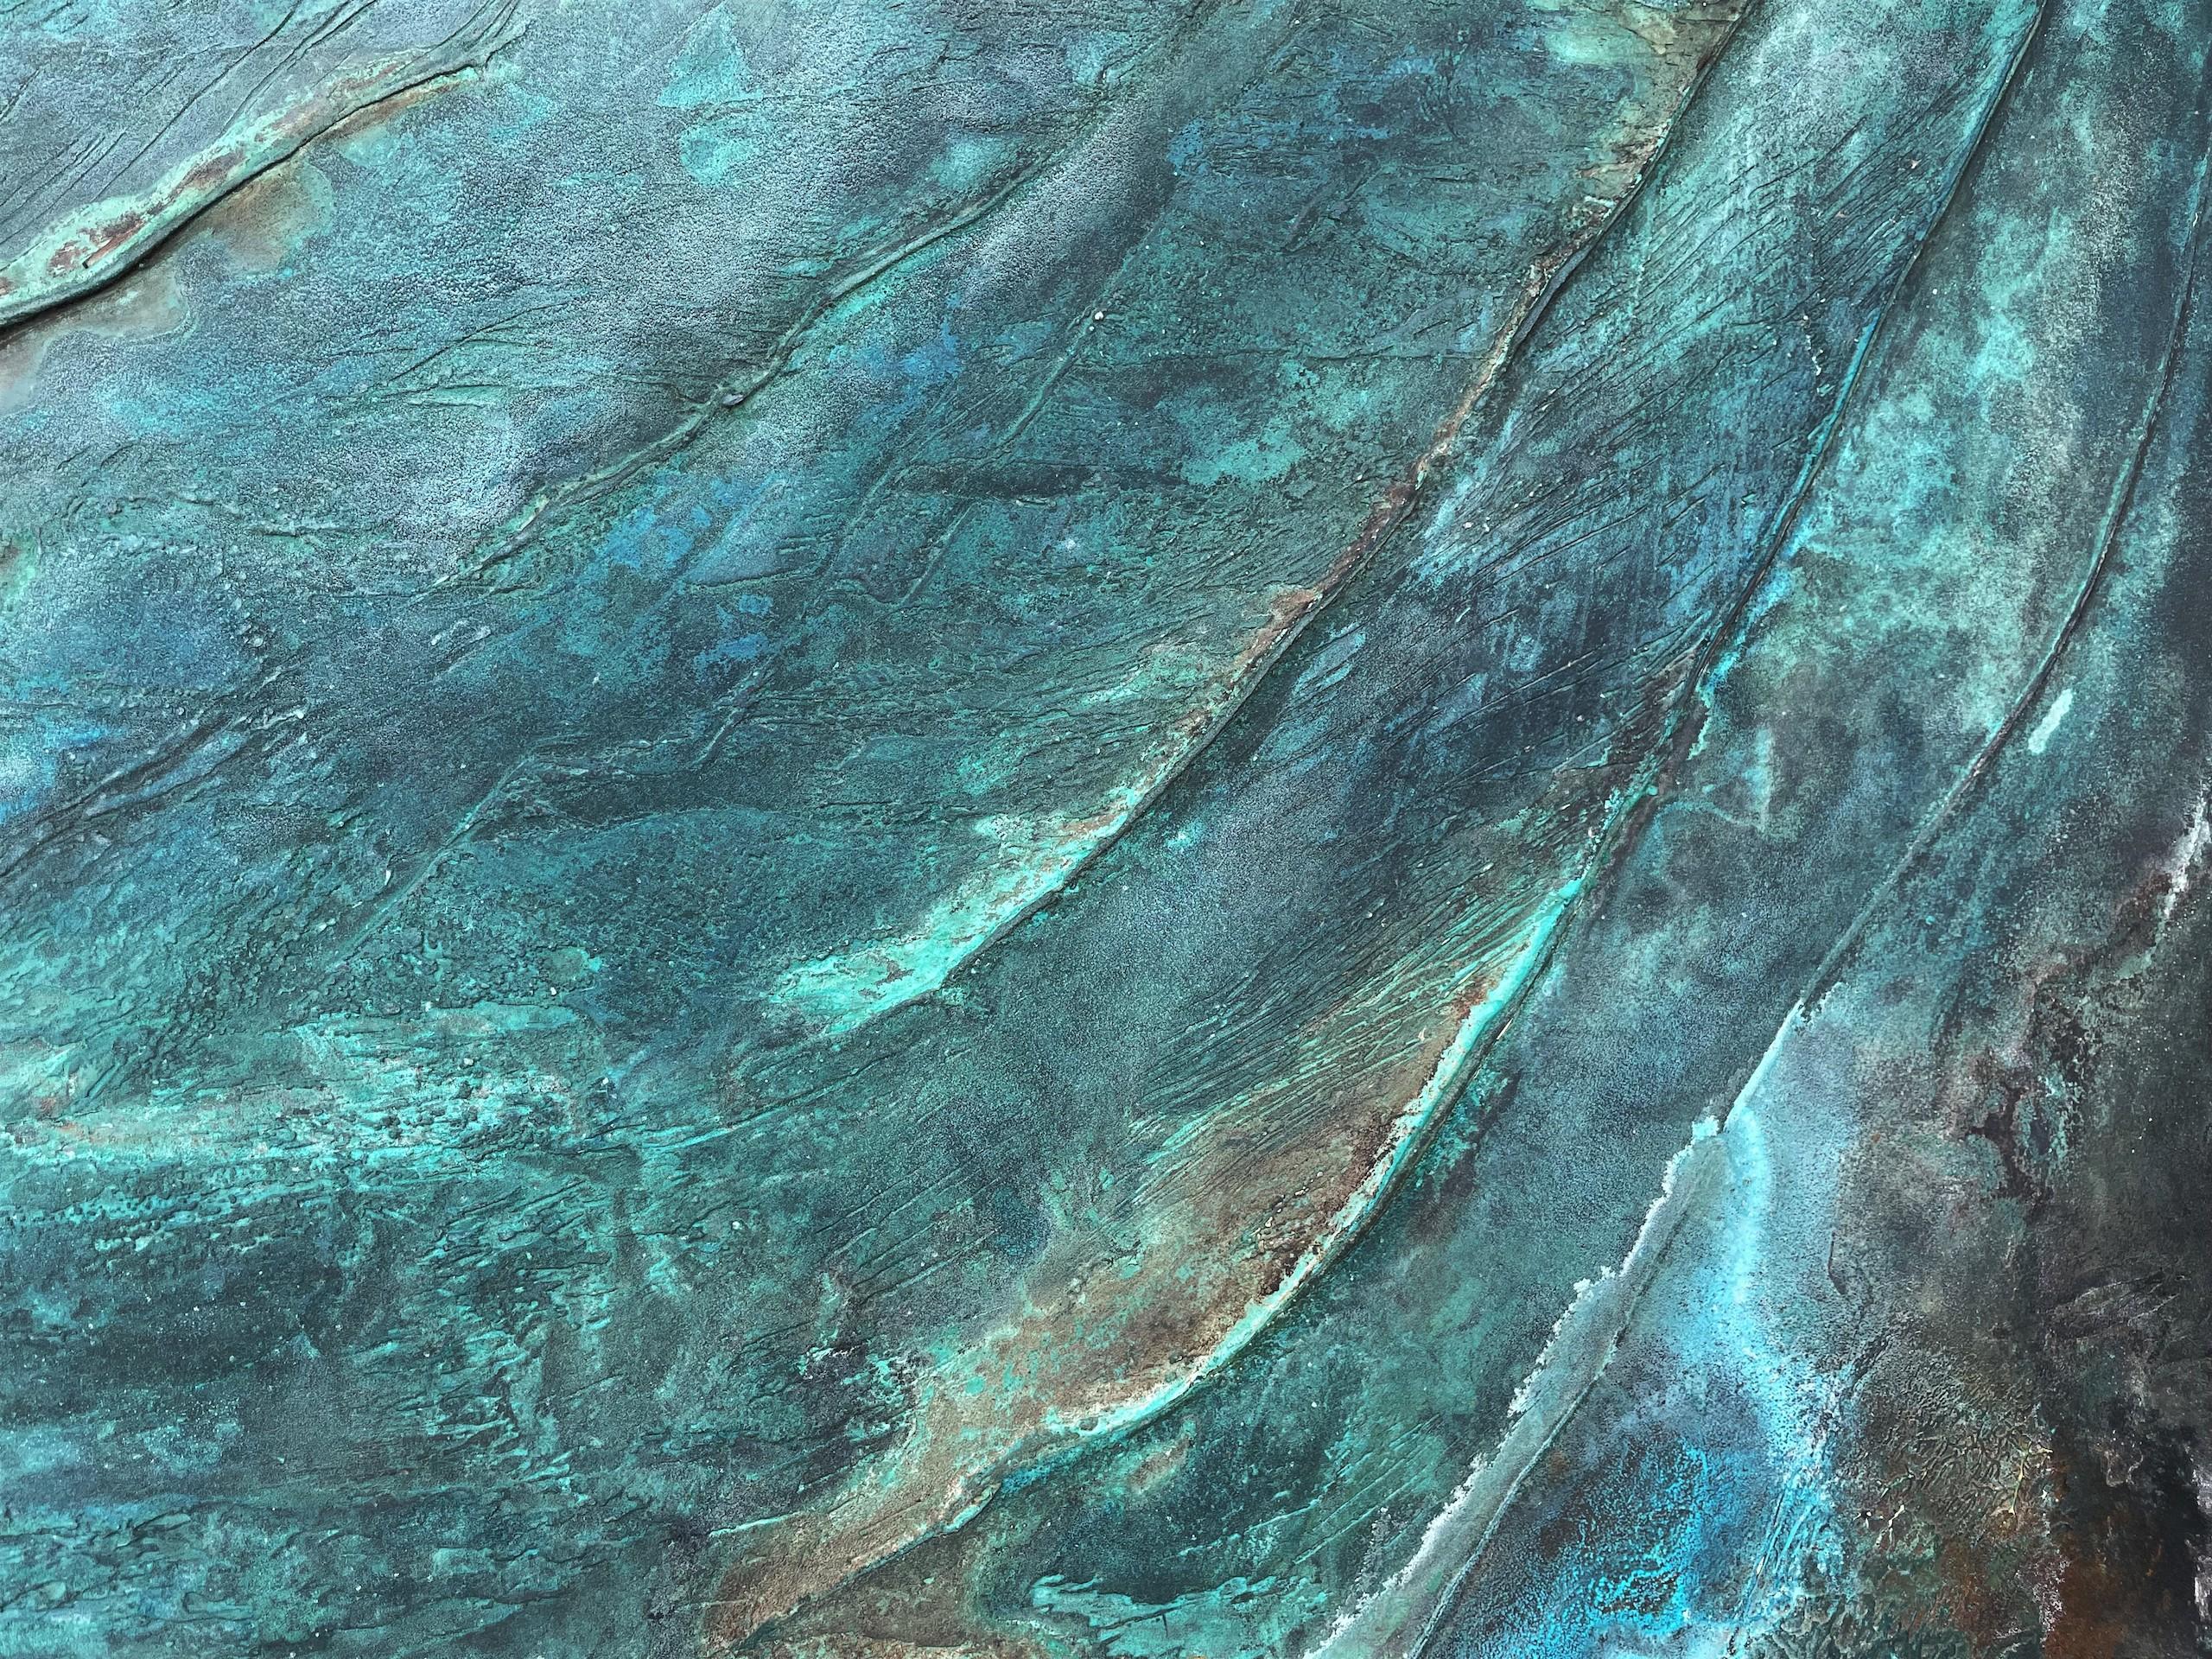 Confluences II by Frédérique Domergue - Abstract painting on metal leaves, sea For Sale 5